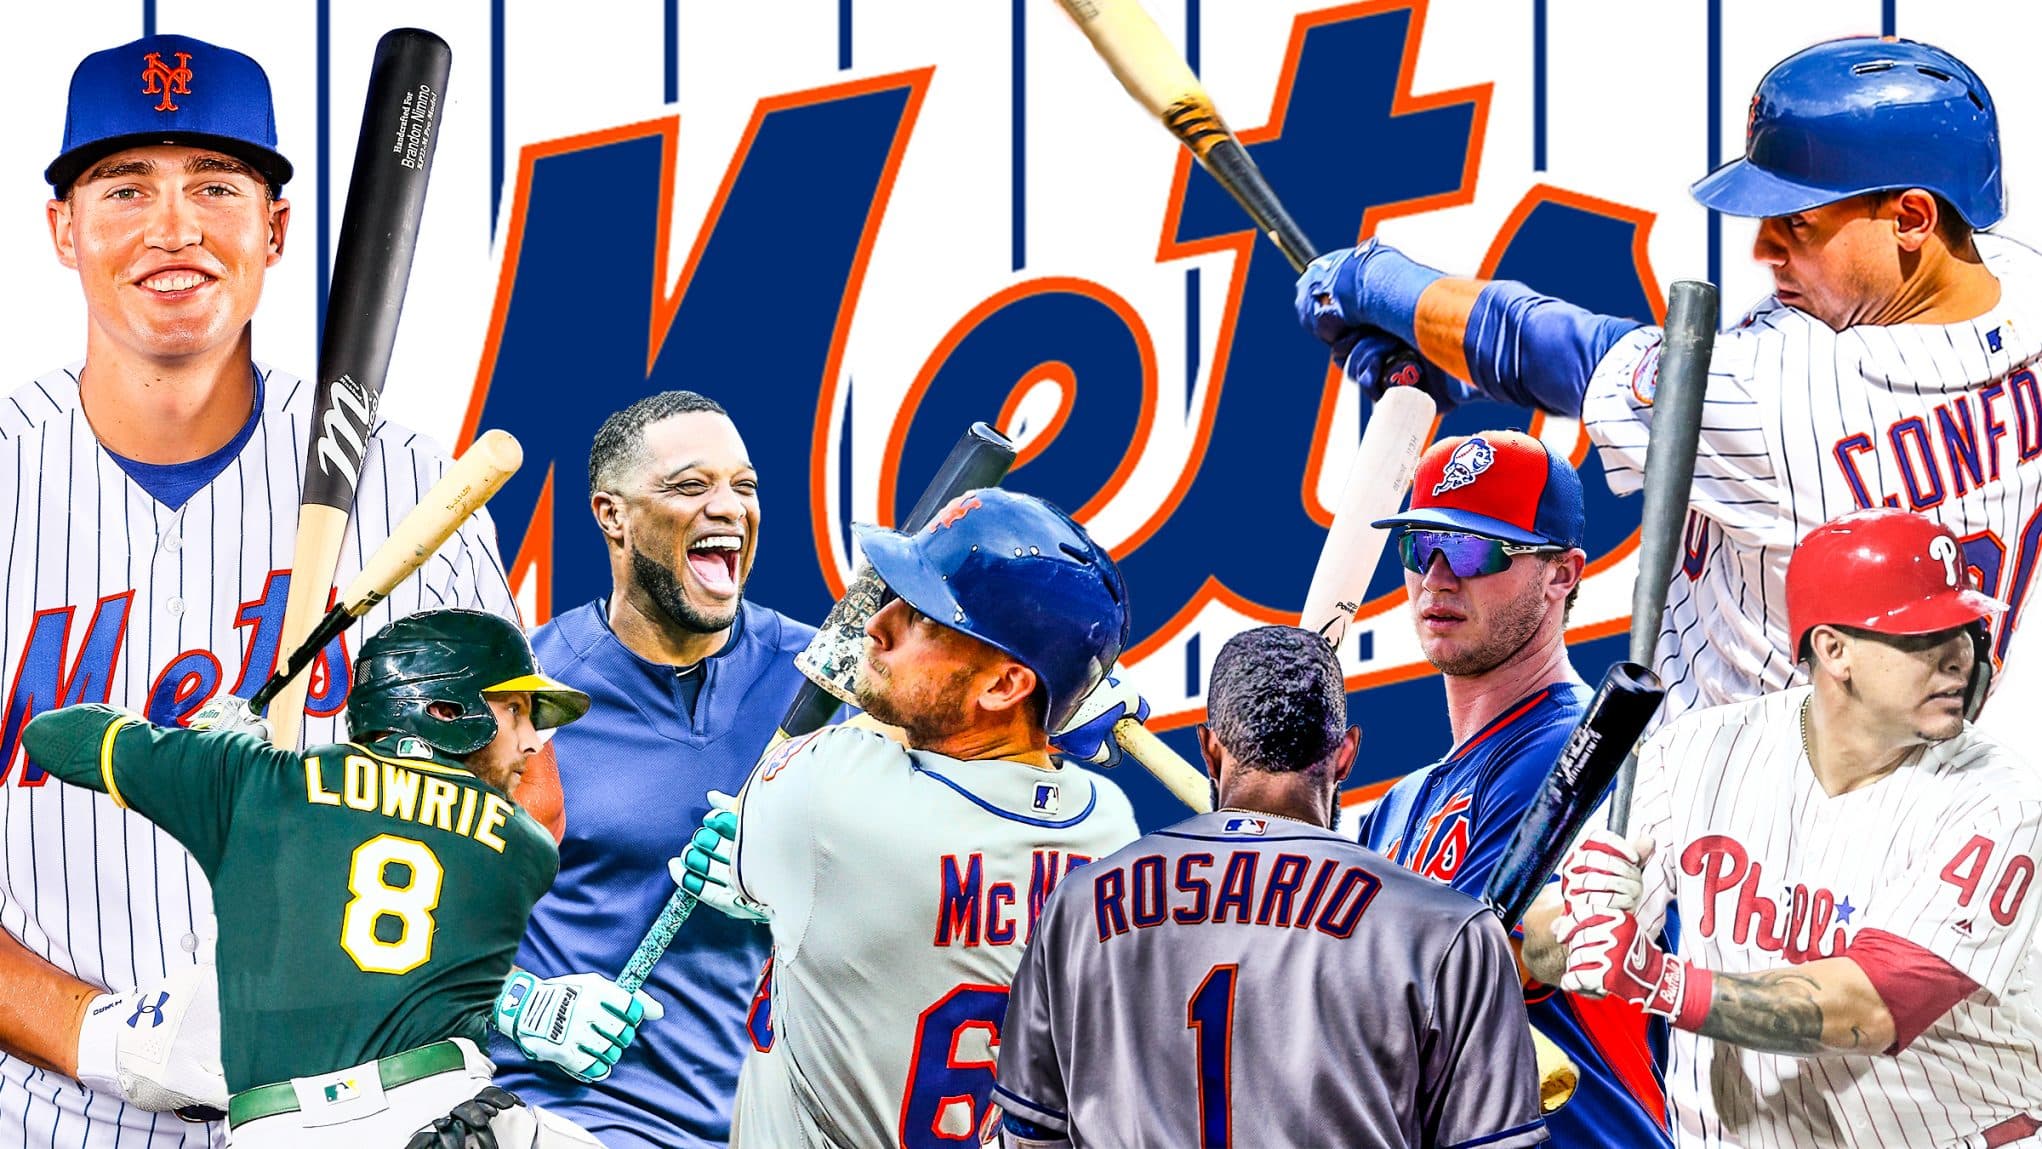 New York Mets 2019 lineup: Breaking down the RHP, LHP possibilities